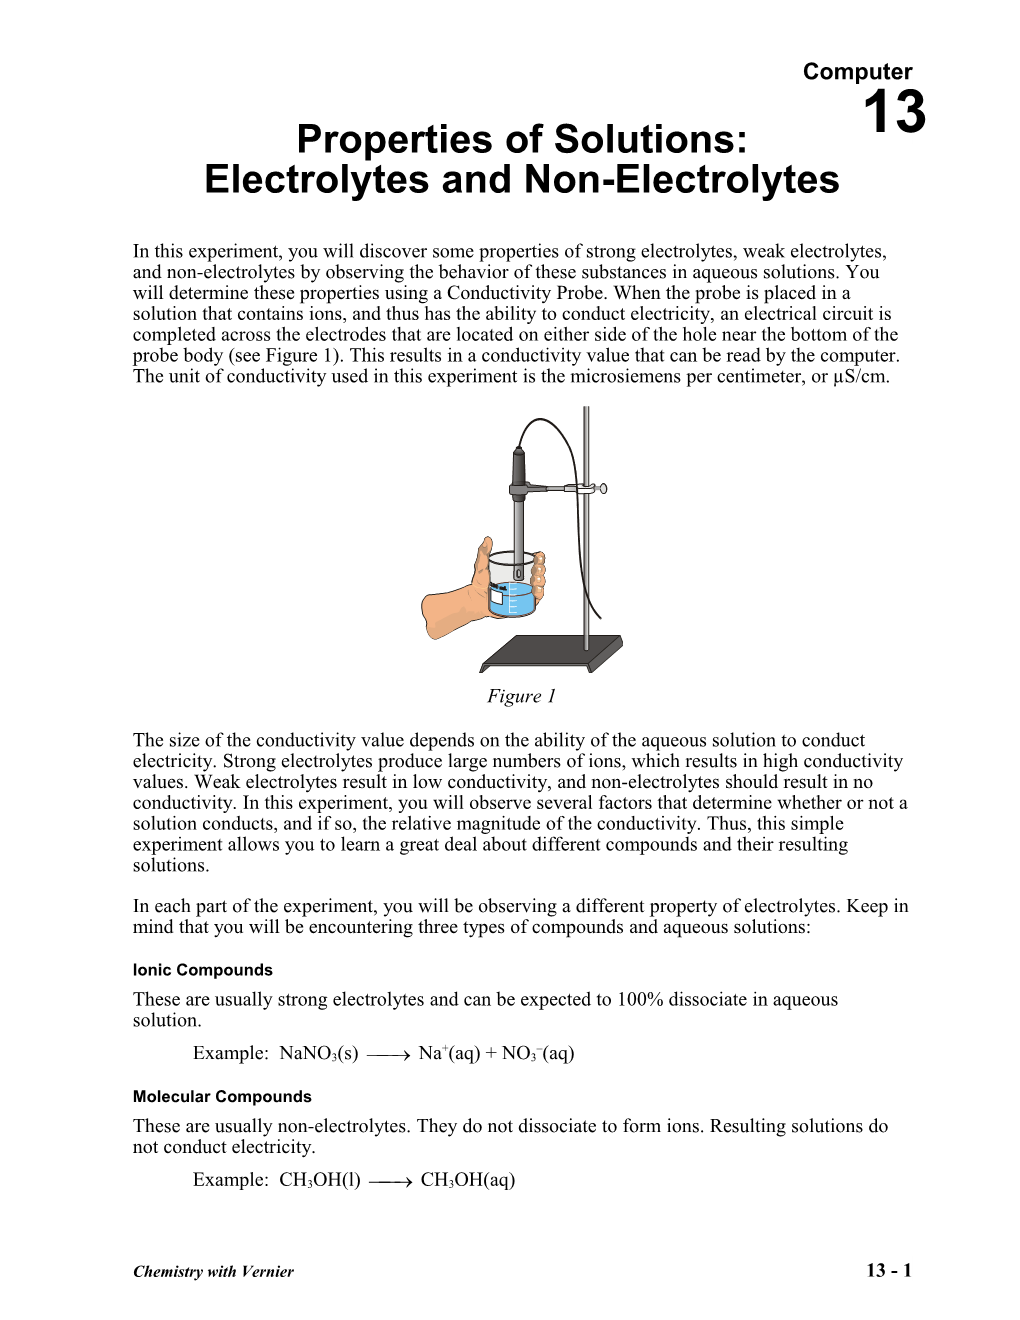 Properties of Solutions: Electrolytes and Non-Electrolytes